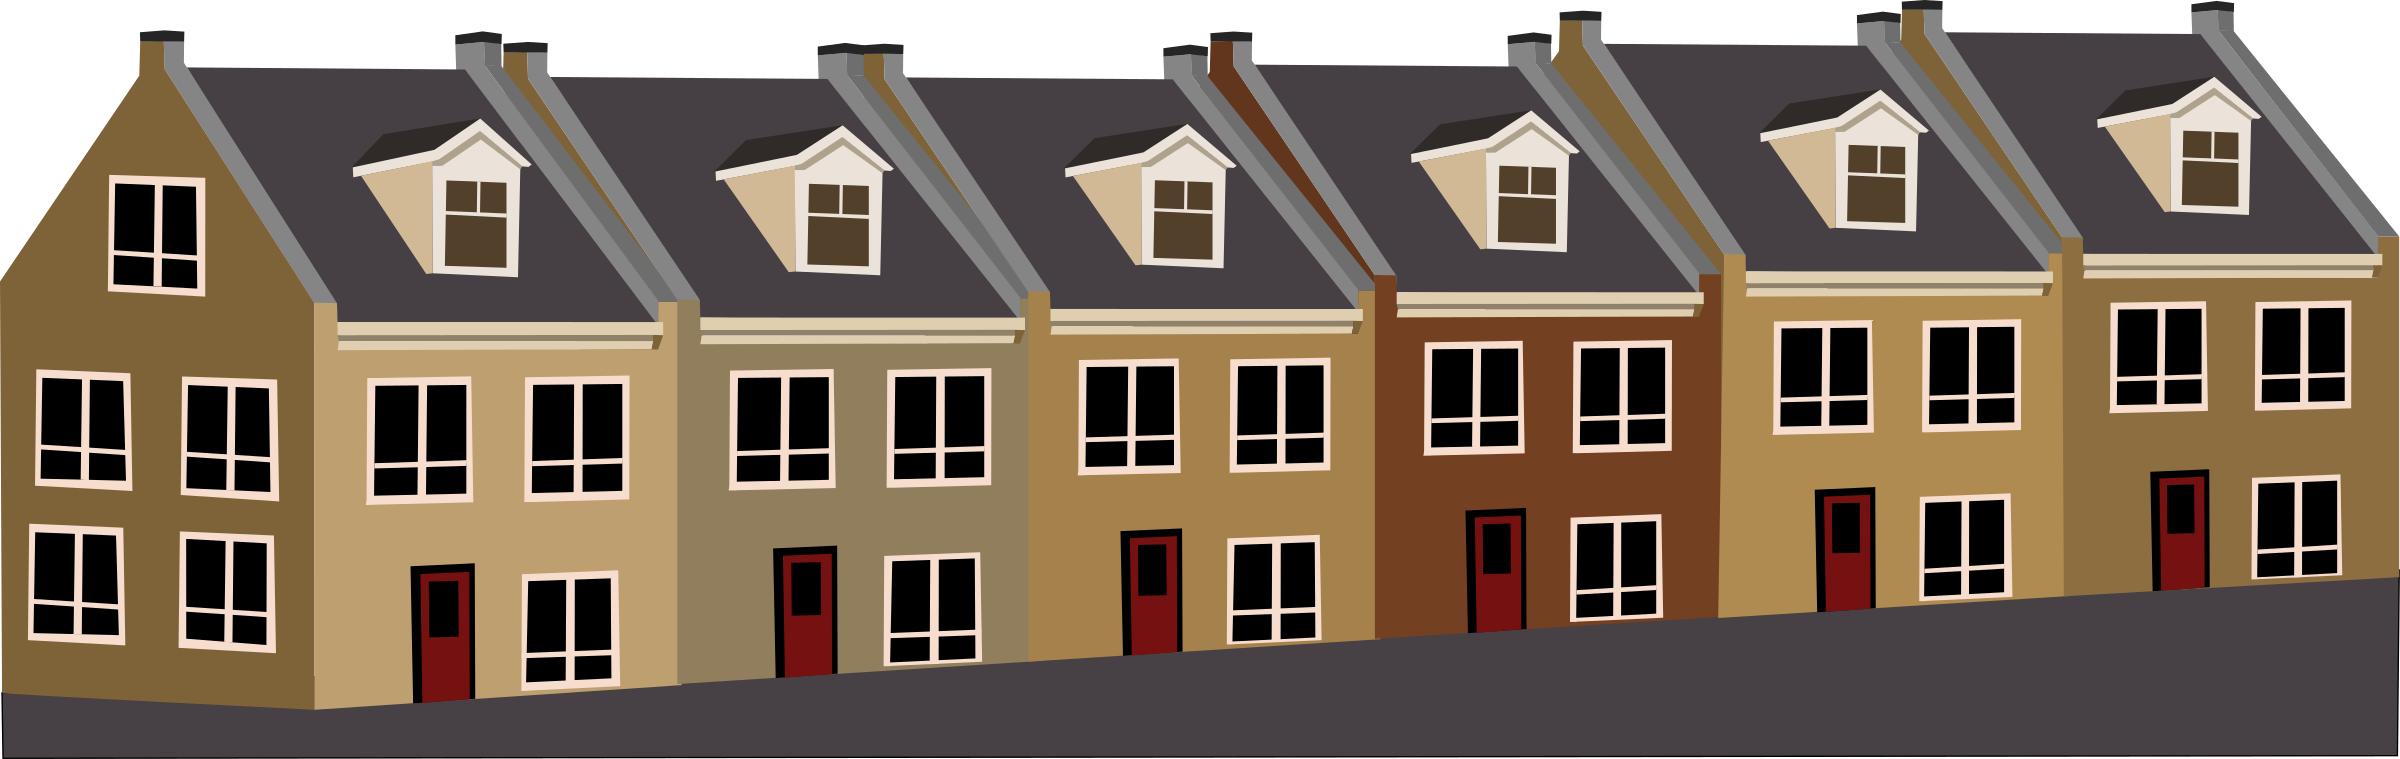 Tarraced houses icons